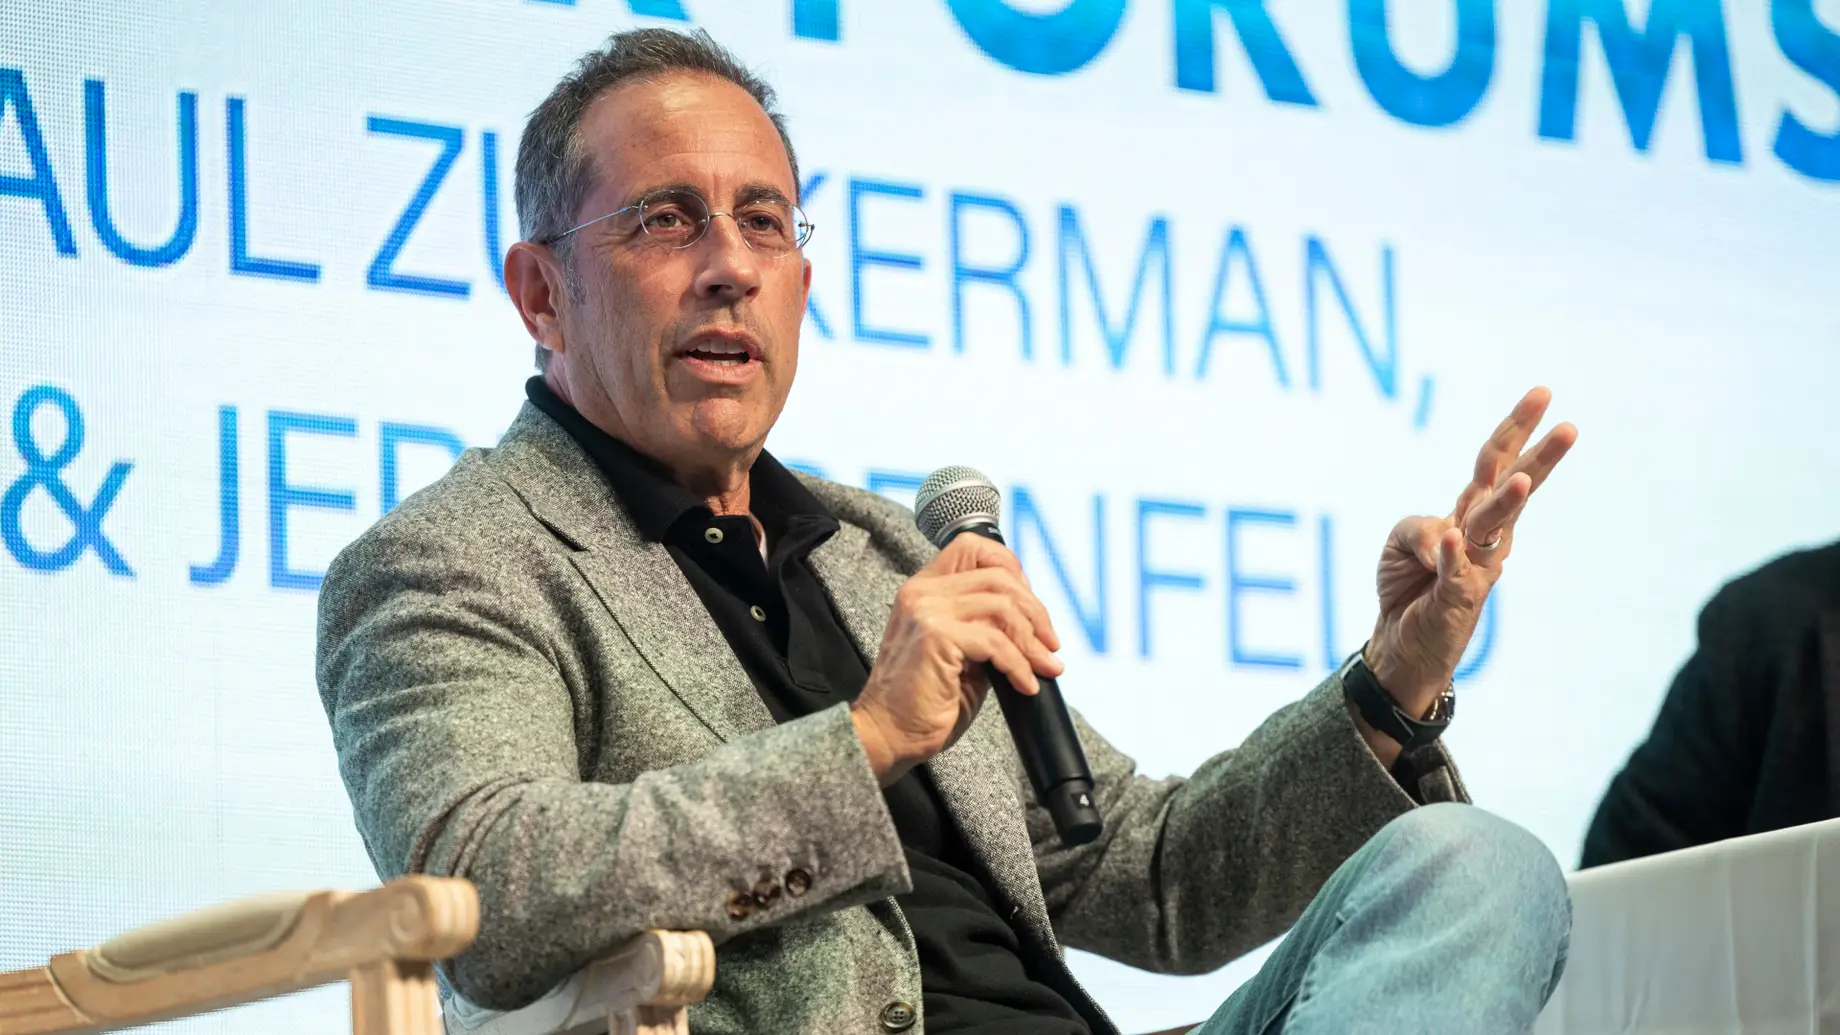 Jerry Seinfeld Says ‘Movie Business Is Over’ and Has Been Replaced by ‘Disorientation’